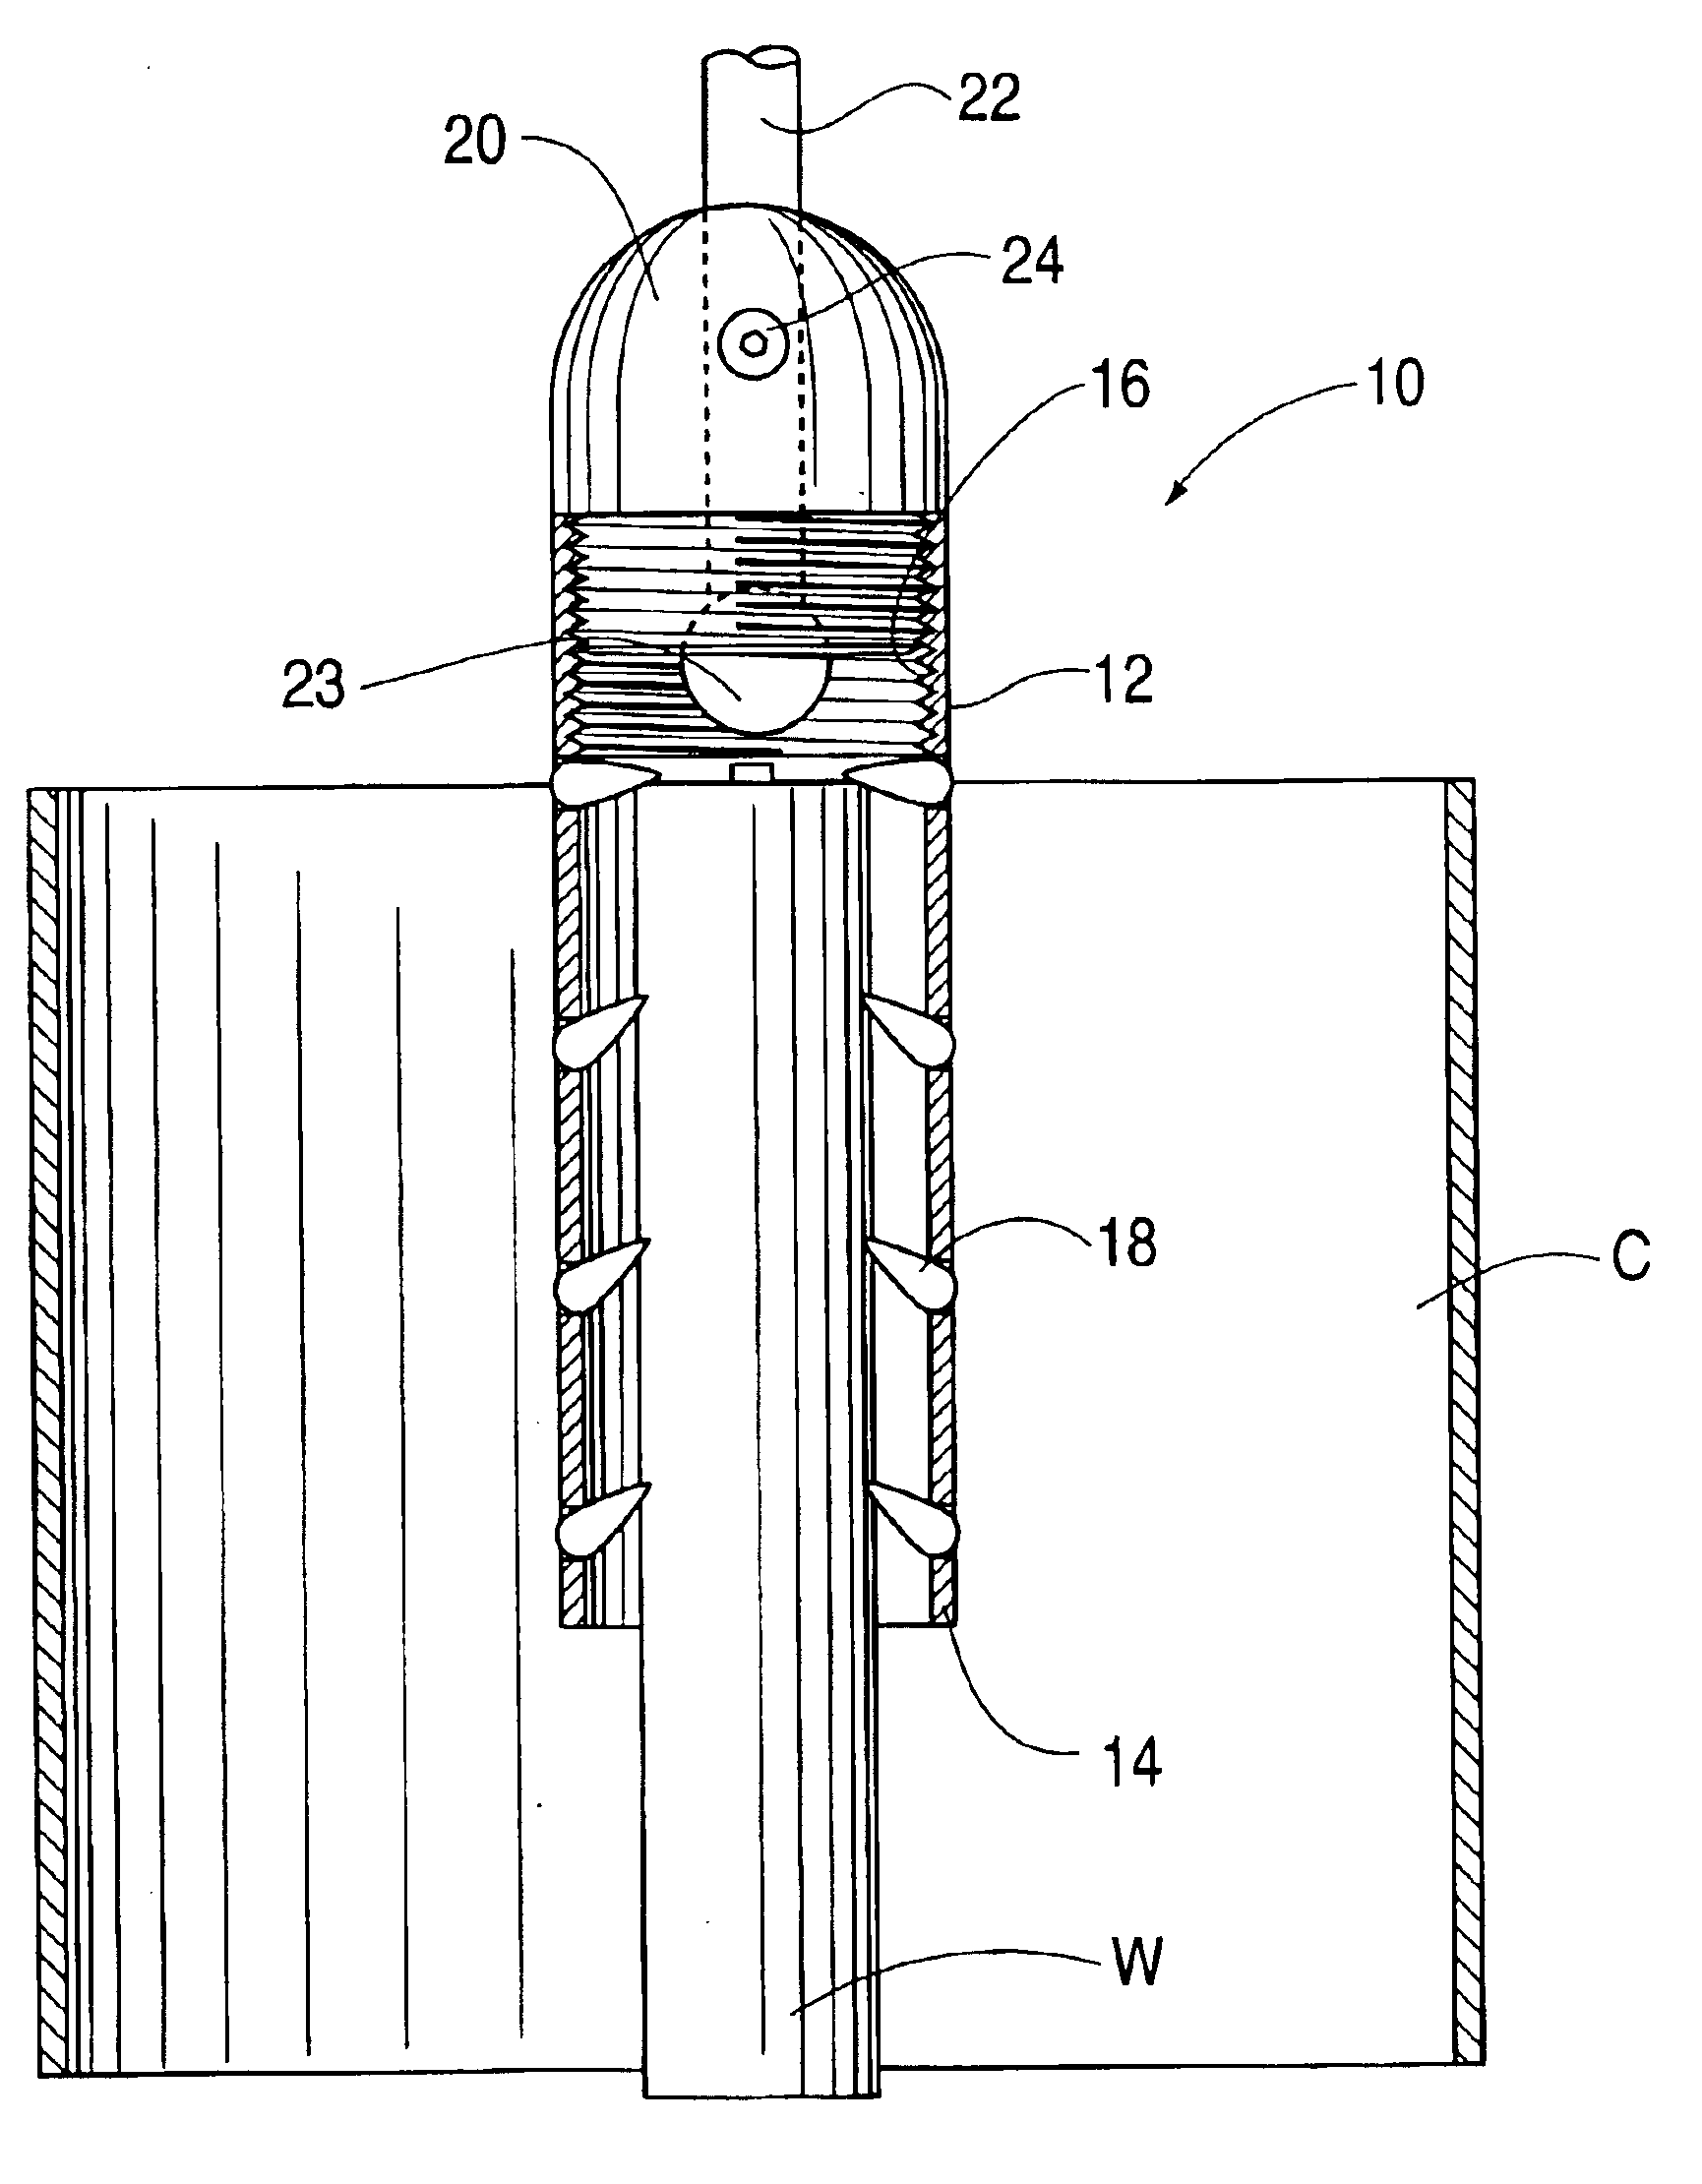 Cable clamping apparatus and method